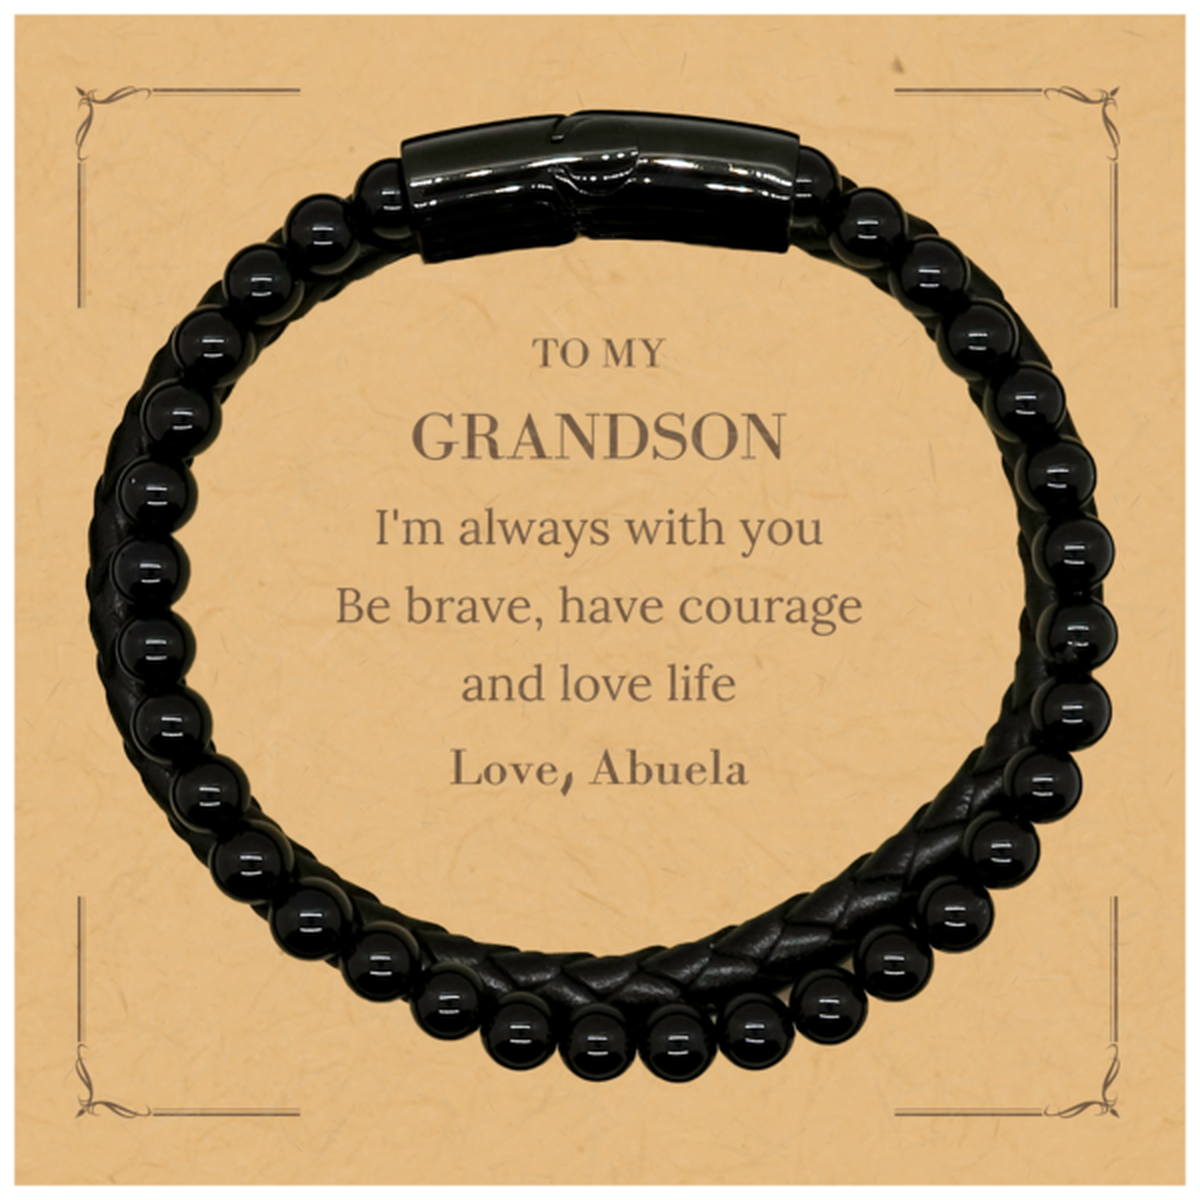 To My Grandson Gifts from Abuela, Unique Stone Leather Bracelets Inspirational Christmas Birthday Graduation Gifts for Grandson I'm always with you. Be brave, have courage and love life. Love, Abuela